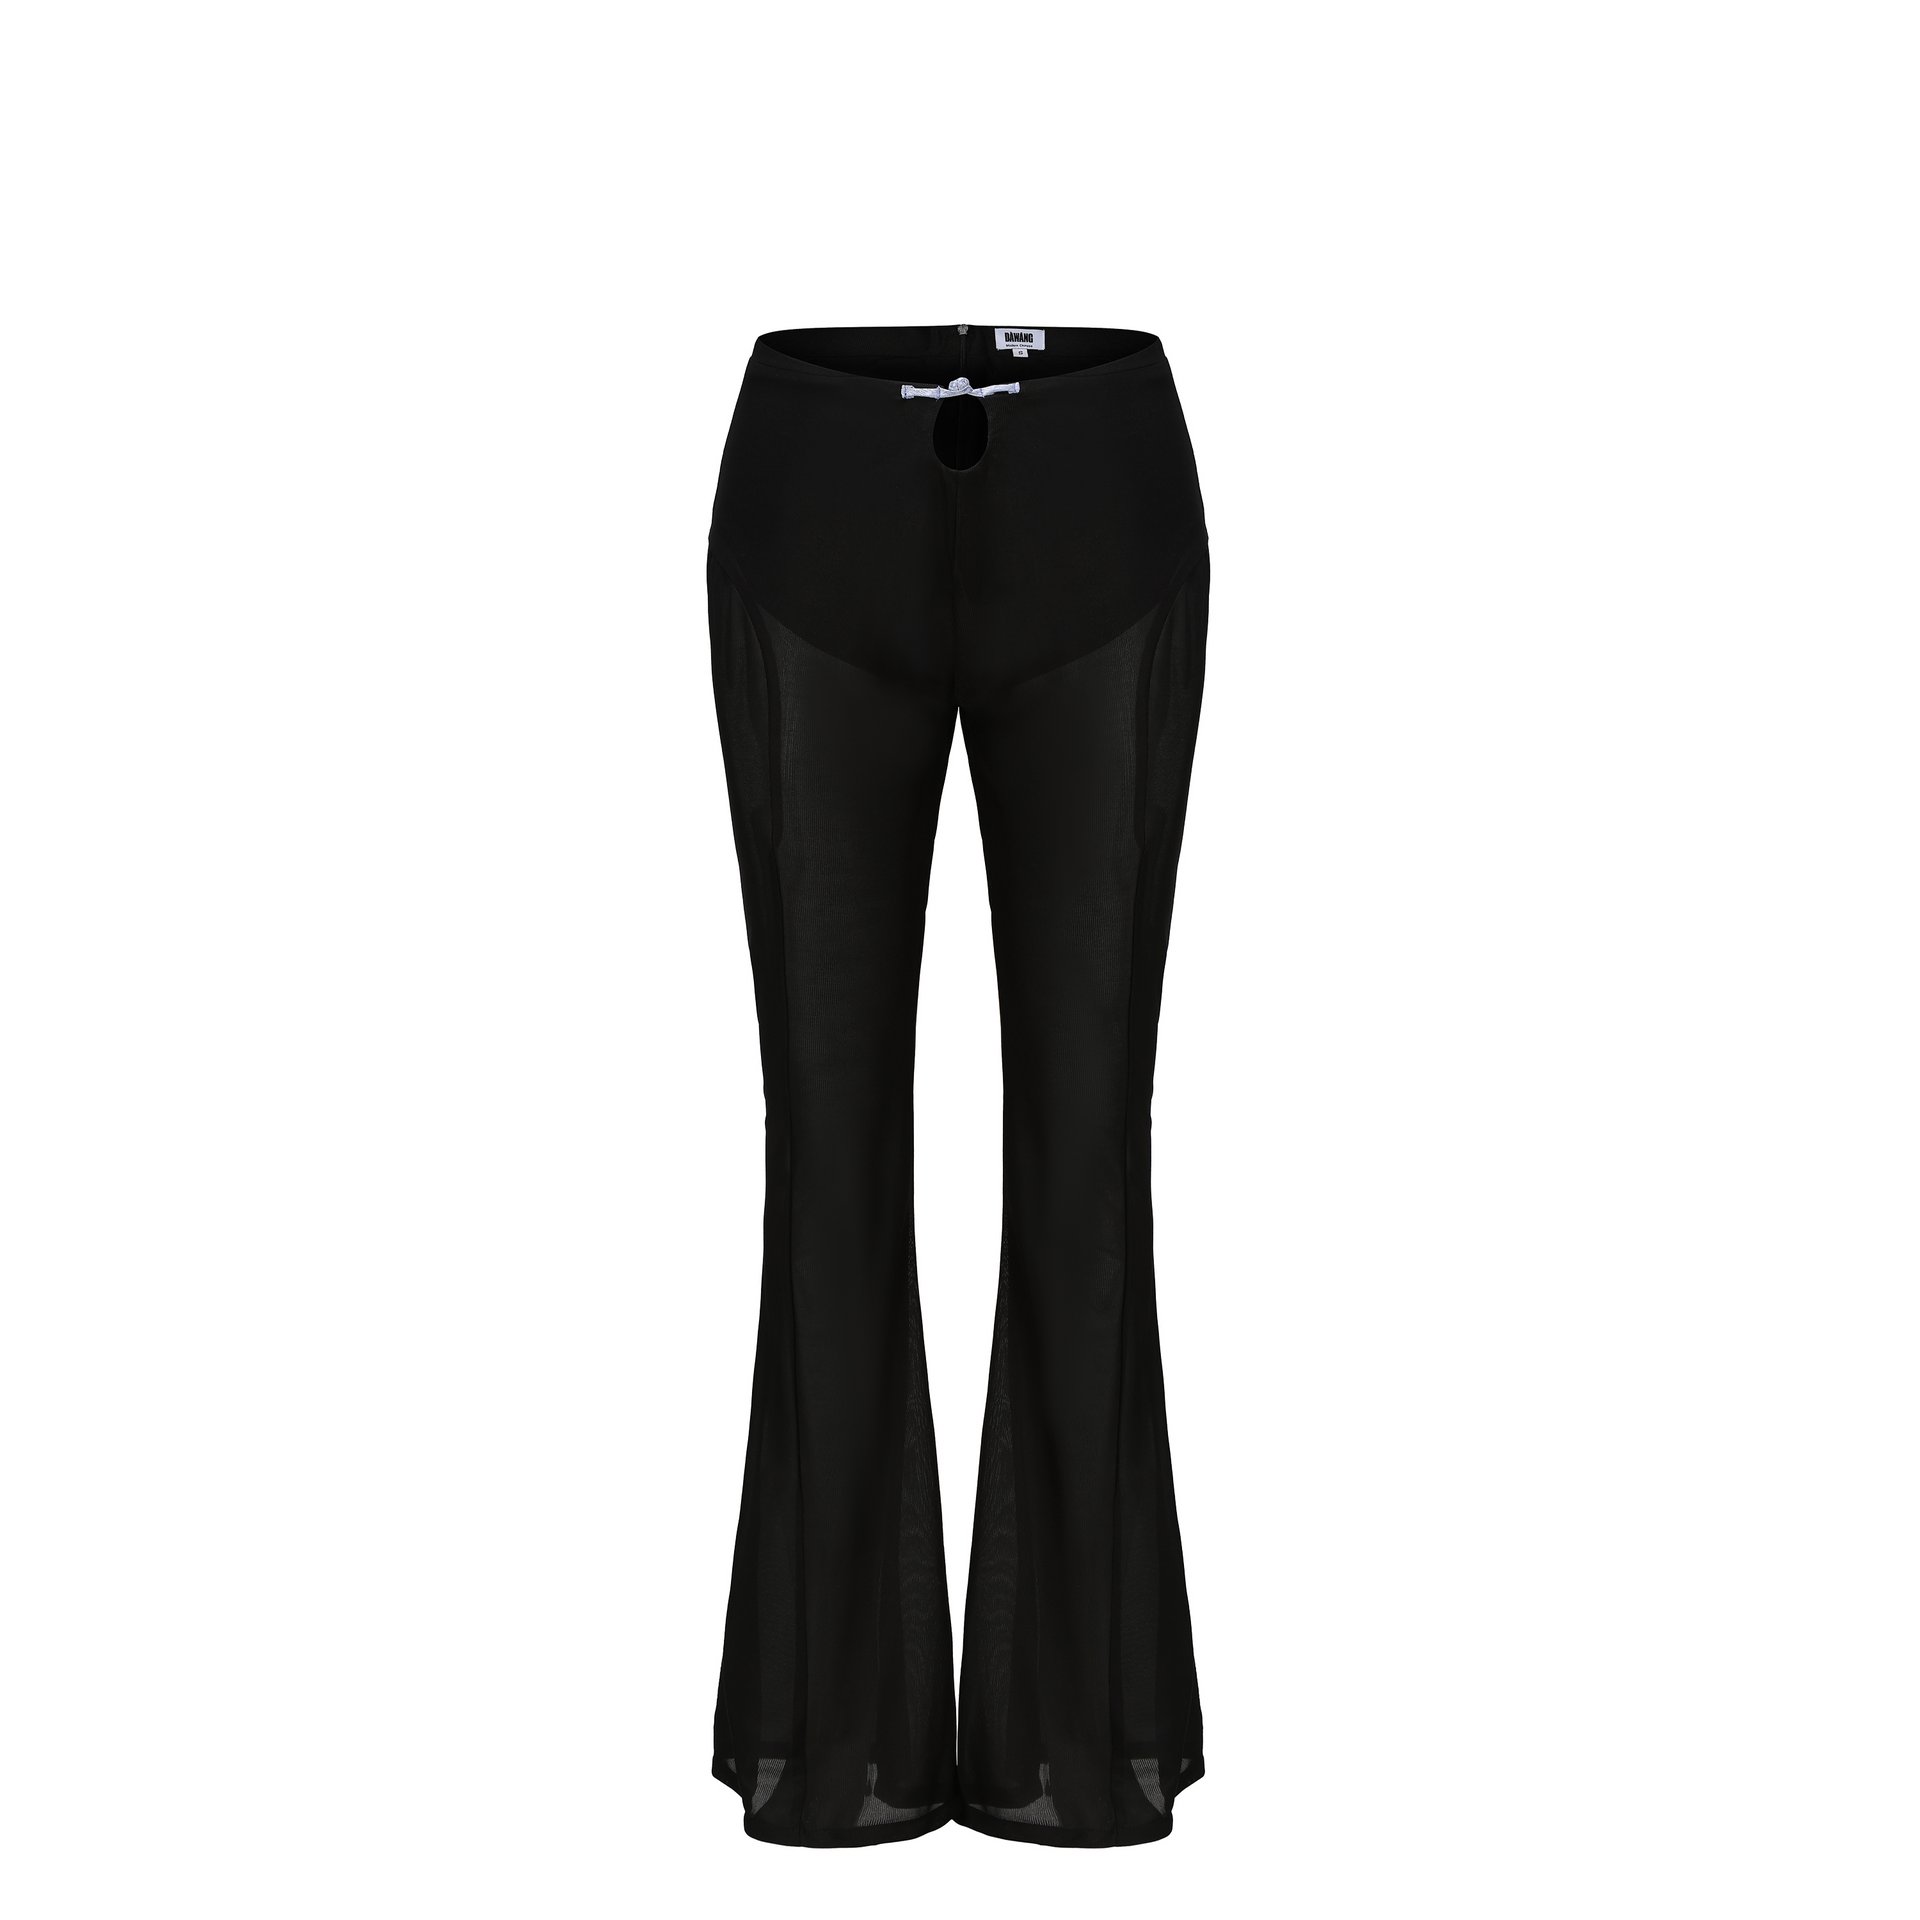 Meng Mid Rise Flare Pants, MID-RISE - WIDE-LEG - FULL LENGTH, Stretch Knit Fabric and Lining, Brocade Knot Button Center Front, black, front